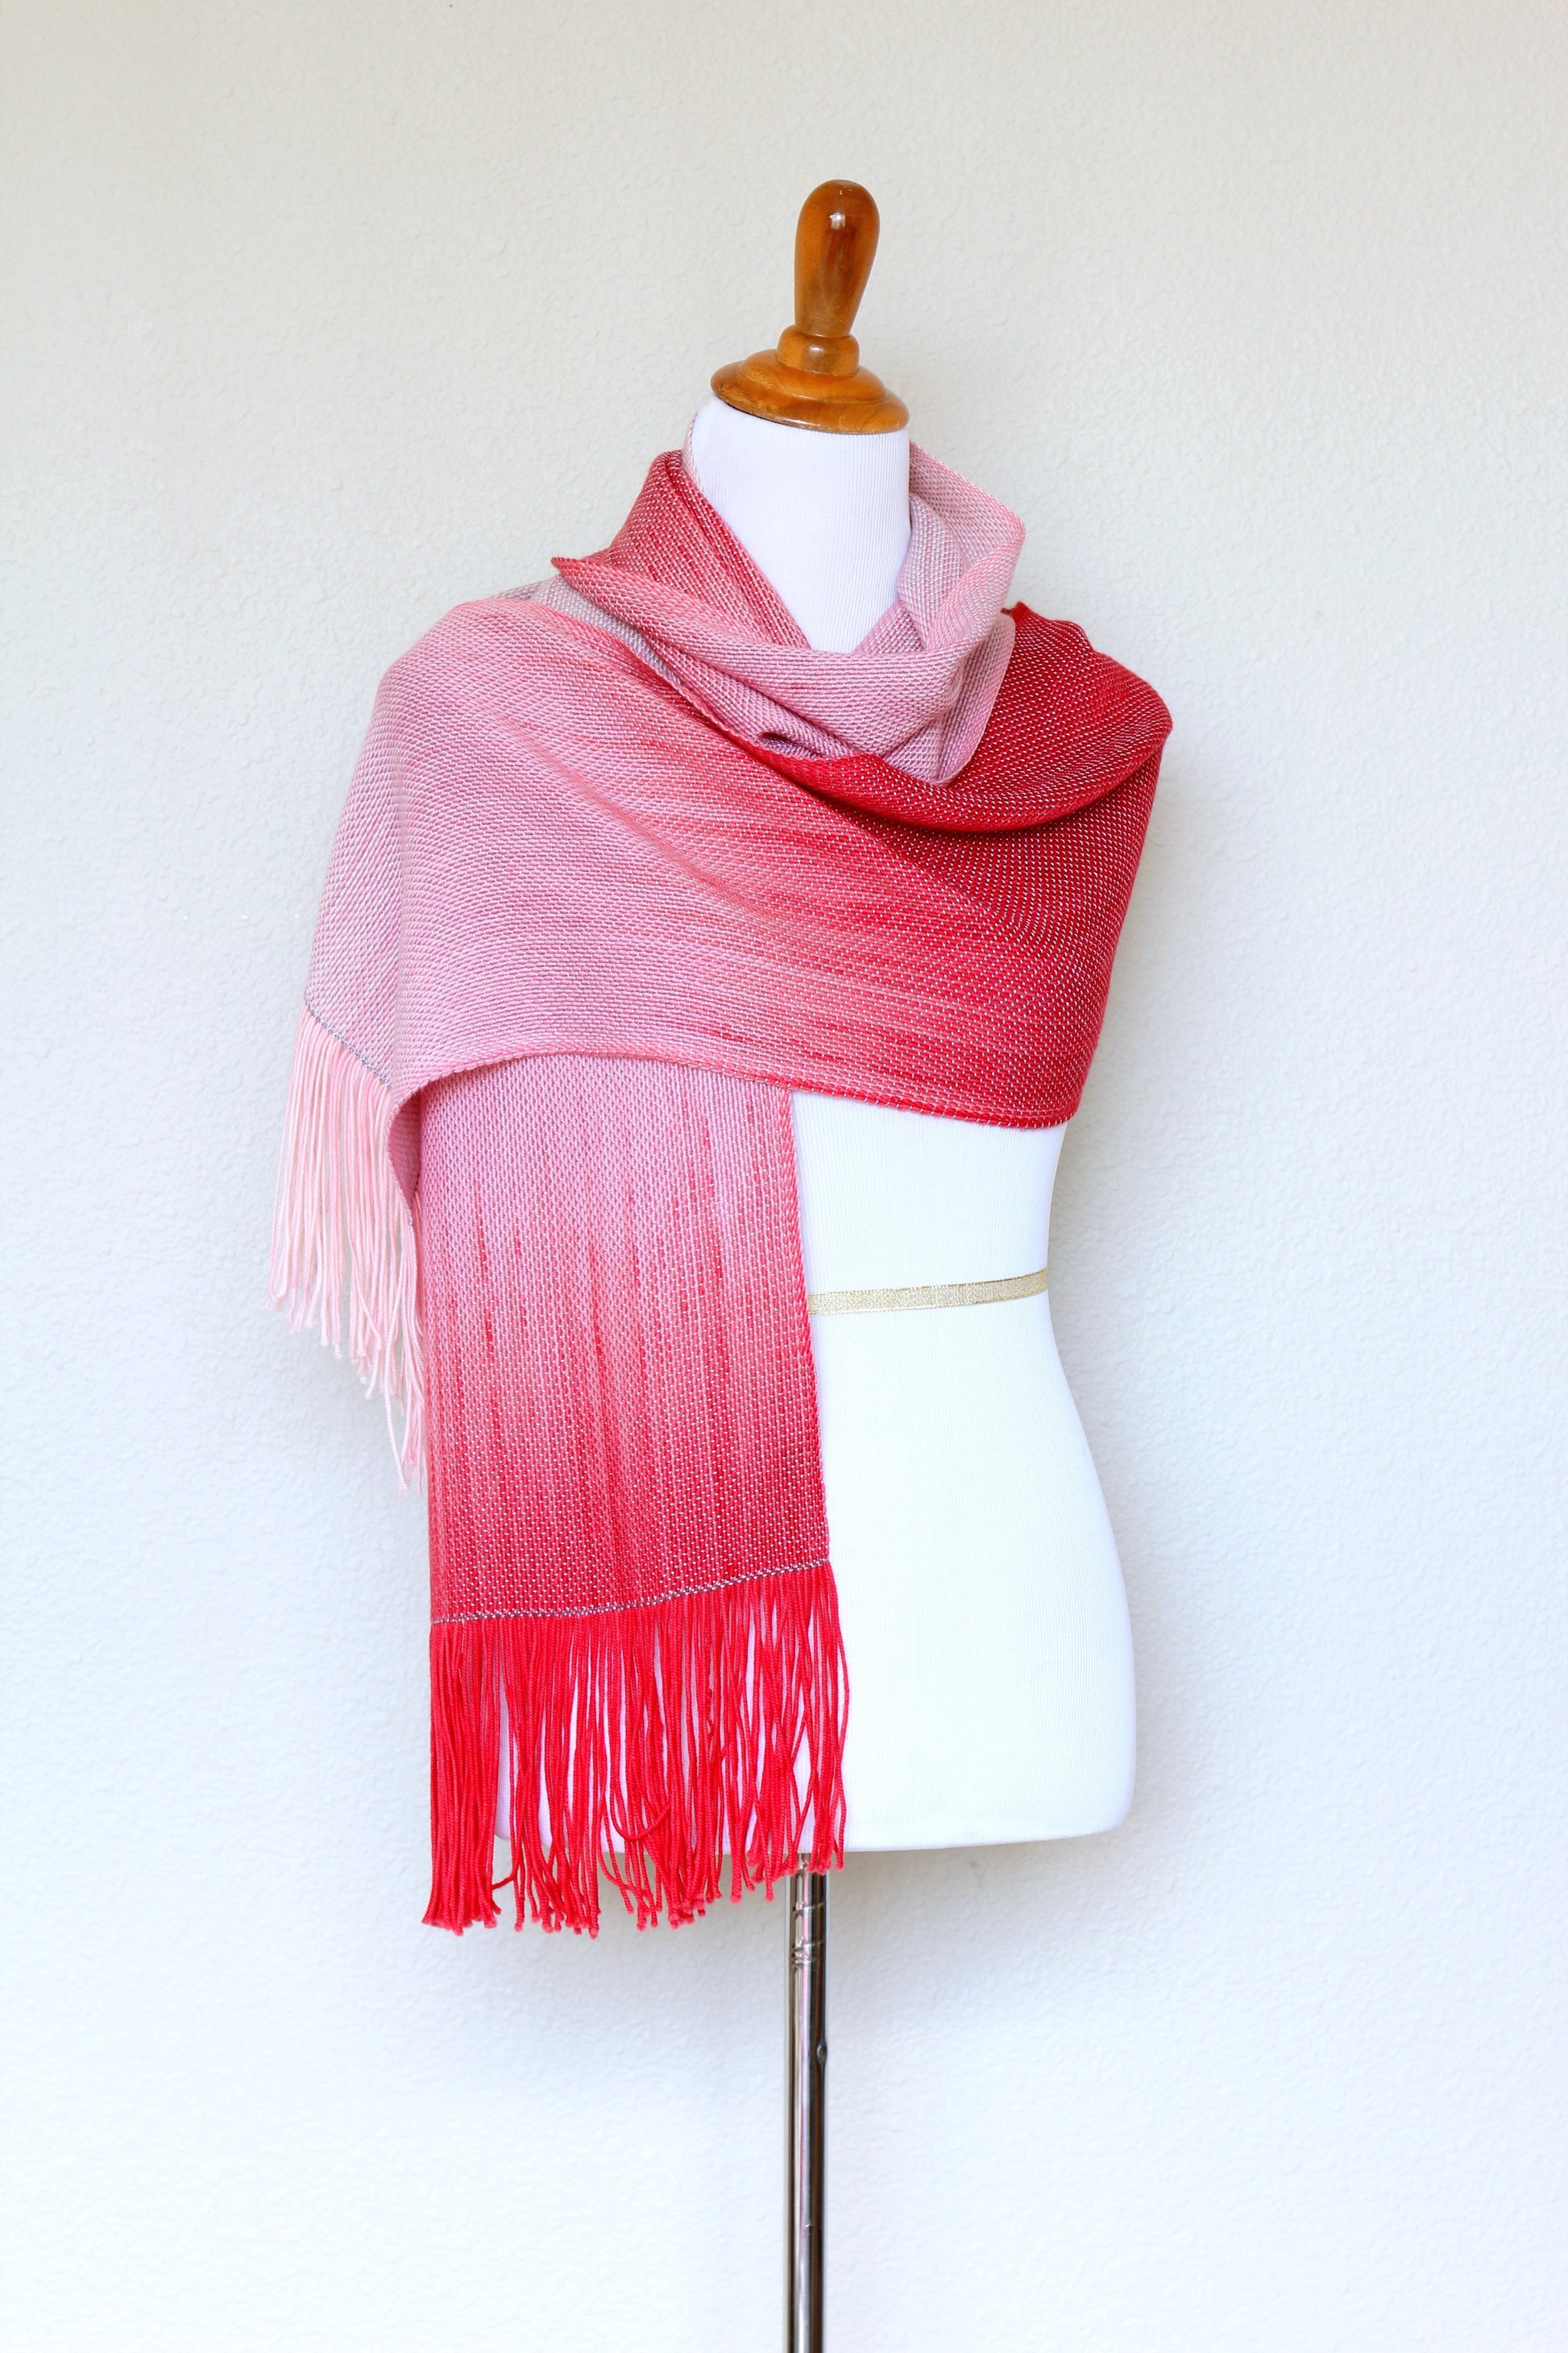 Handwoven scarf in dark and light link shades, women scarf